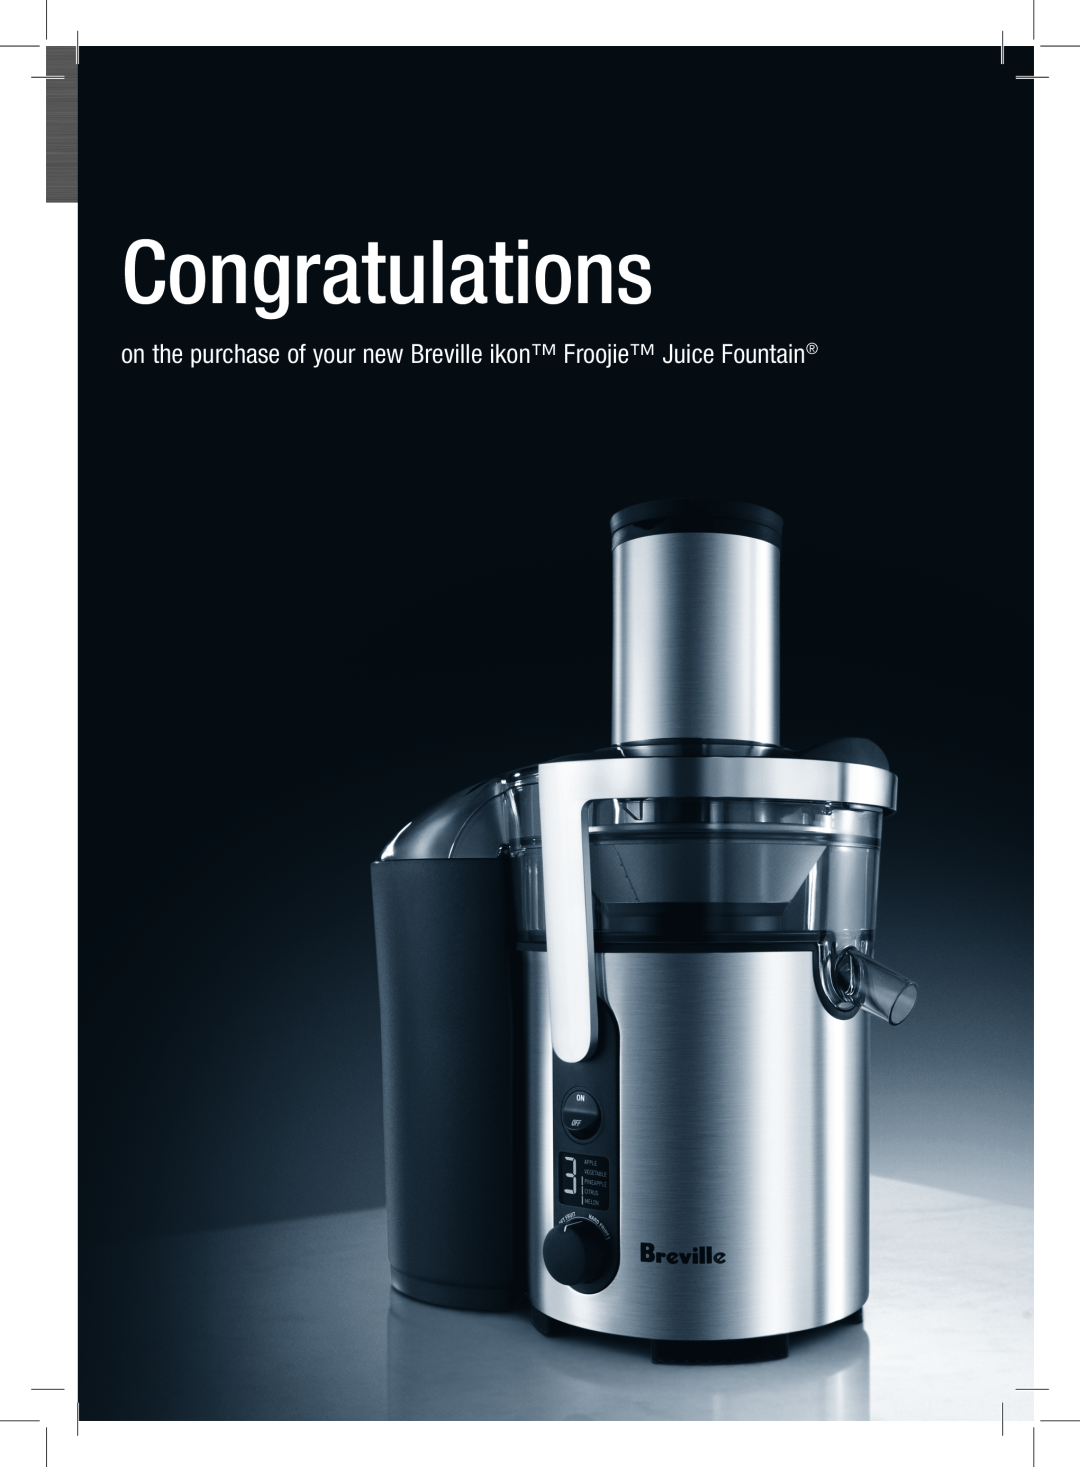 Breville BJE520 manual Congratulations, on the purchase of your new Breville ikon Froojie Juice Fountain 